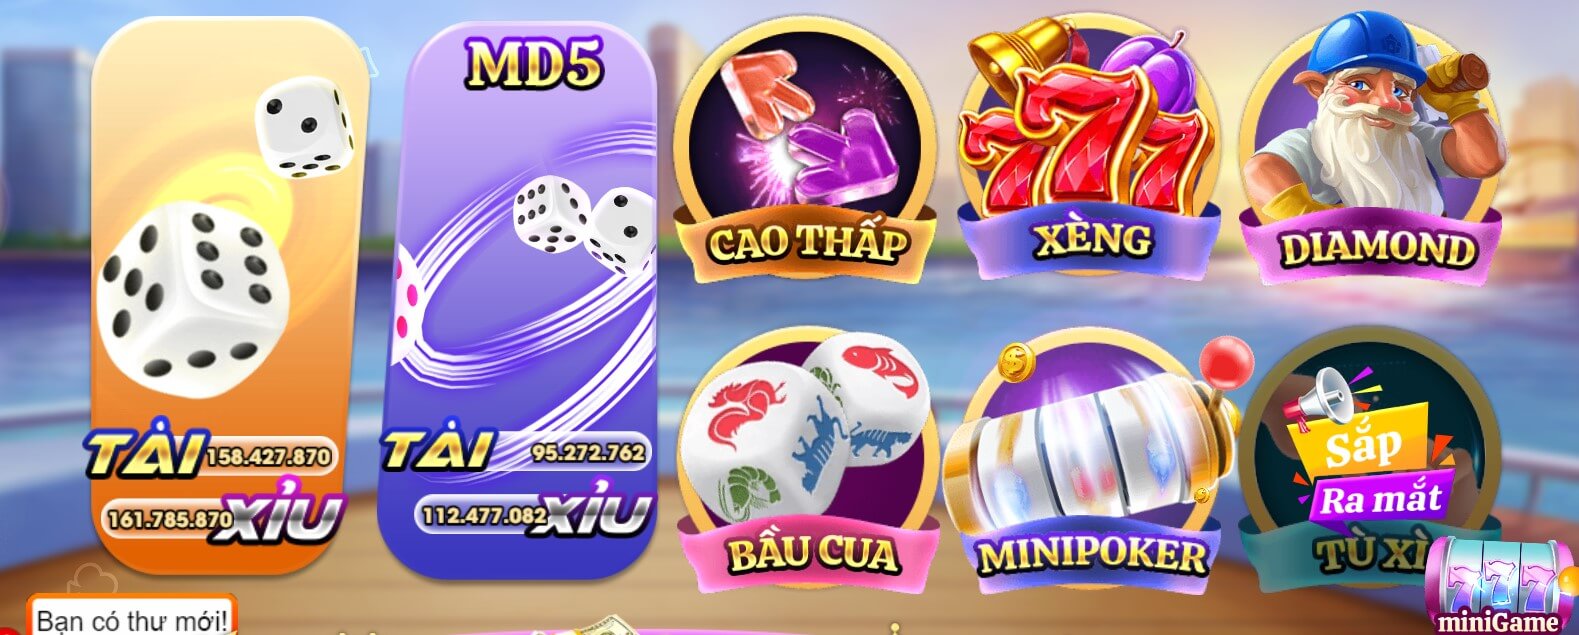 Lux52 | Giao diện bắt mắt, tải app Lux52 APK IOS Android - Ảnh 3